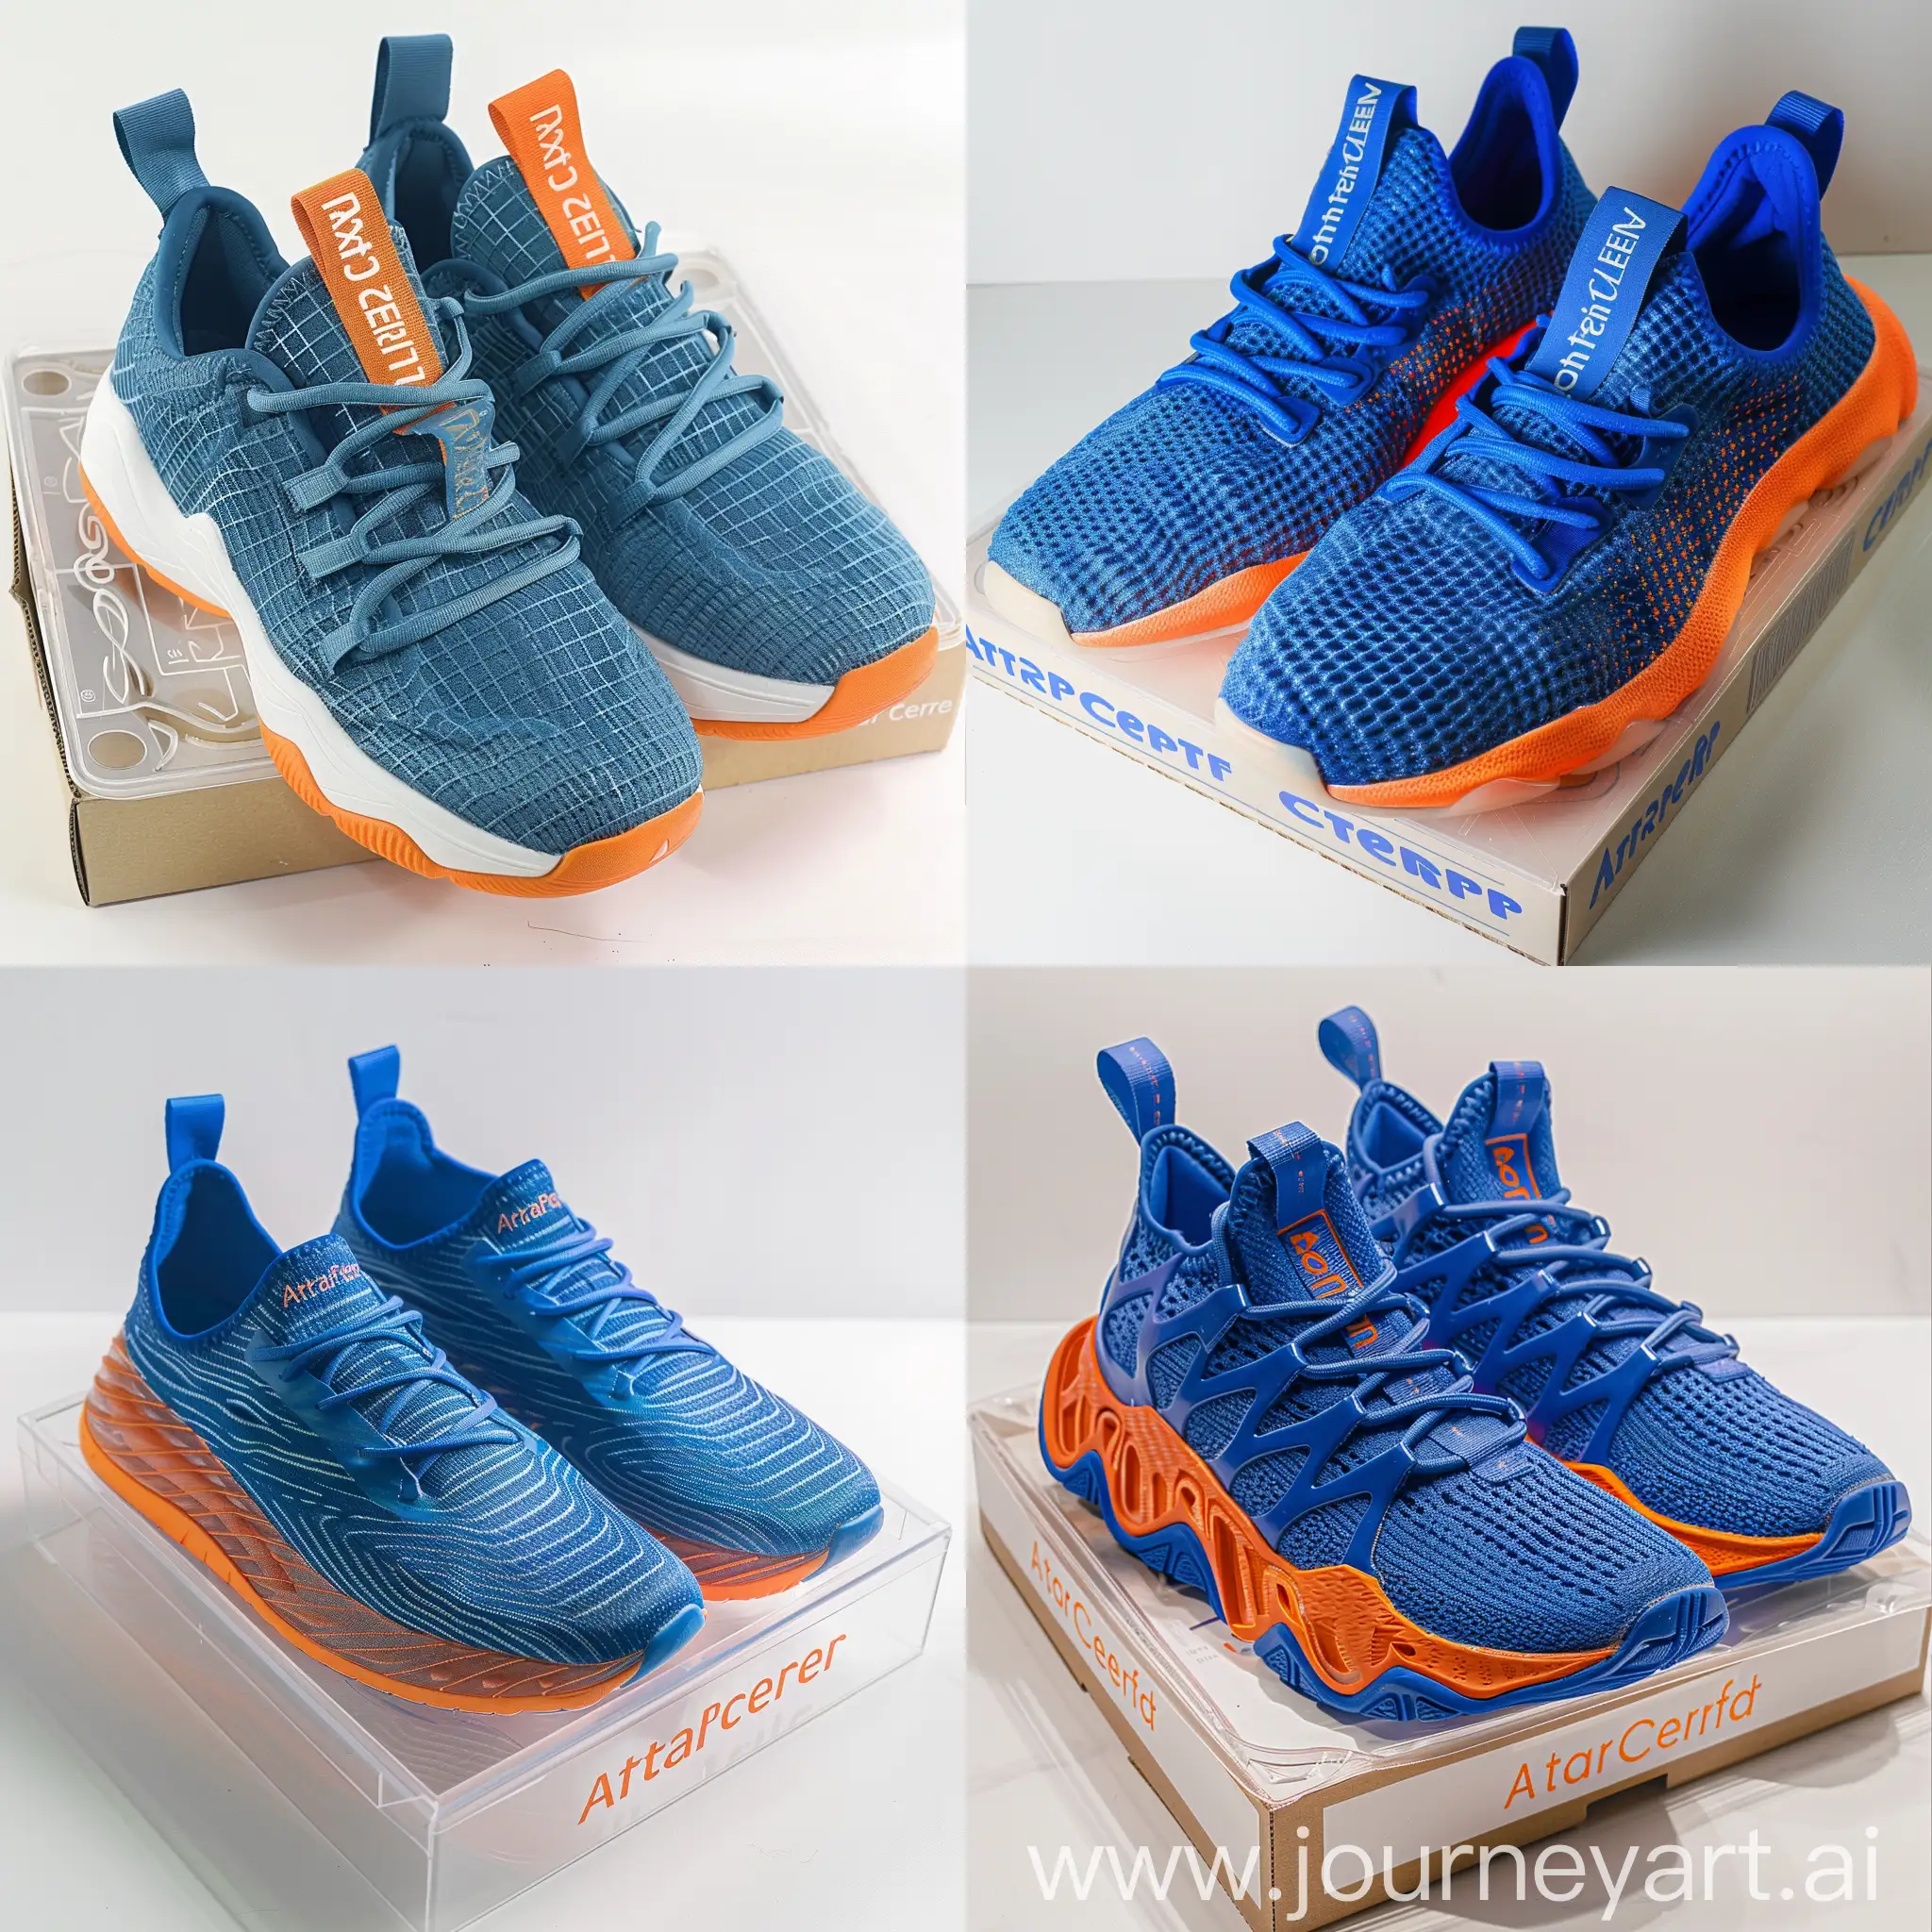 BlueOrange-Sports-Shoes-by-Attar-Center-in-Clear-Cardboard-Box